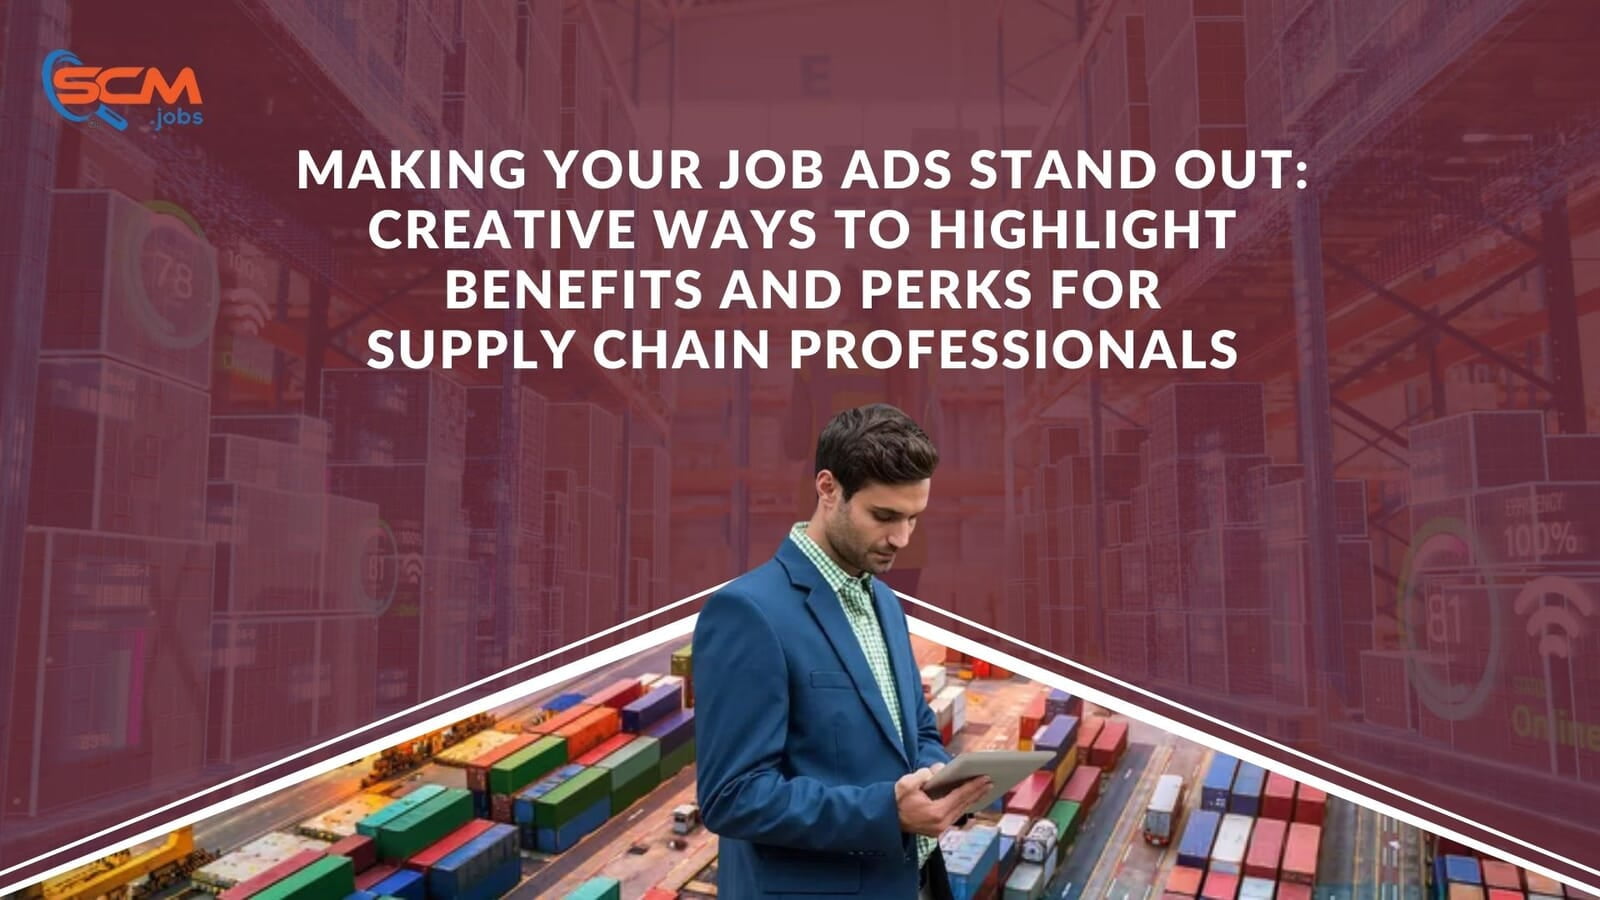 Making Your Job Ads Stand Out: Creative Ways to Highlight Benefits and Perks for Supply Chain Professionals